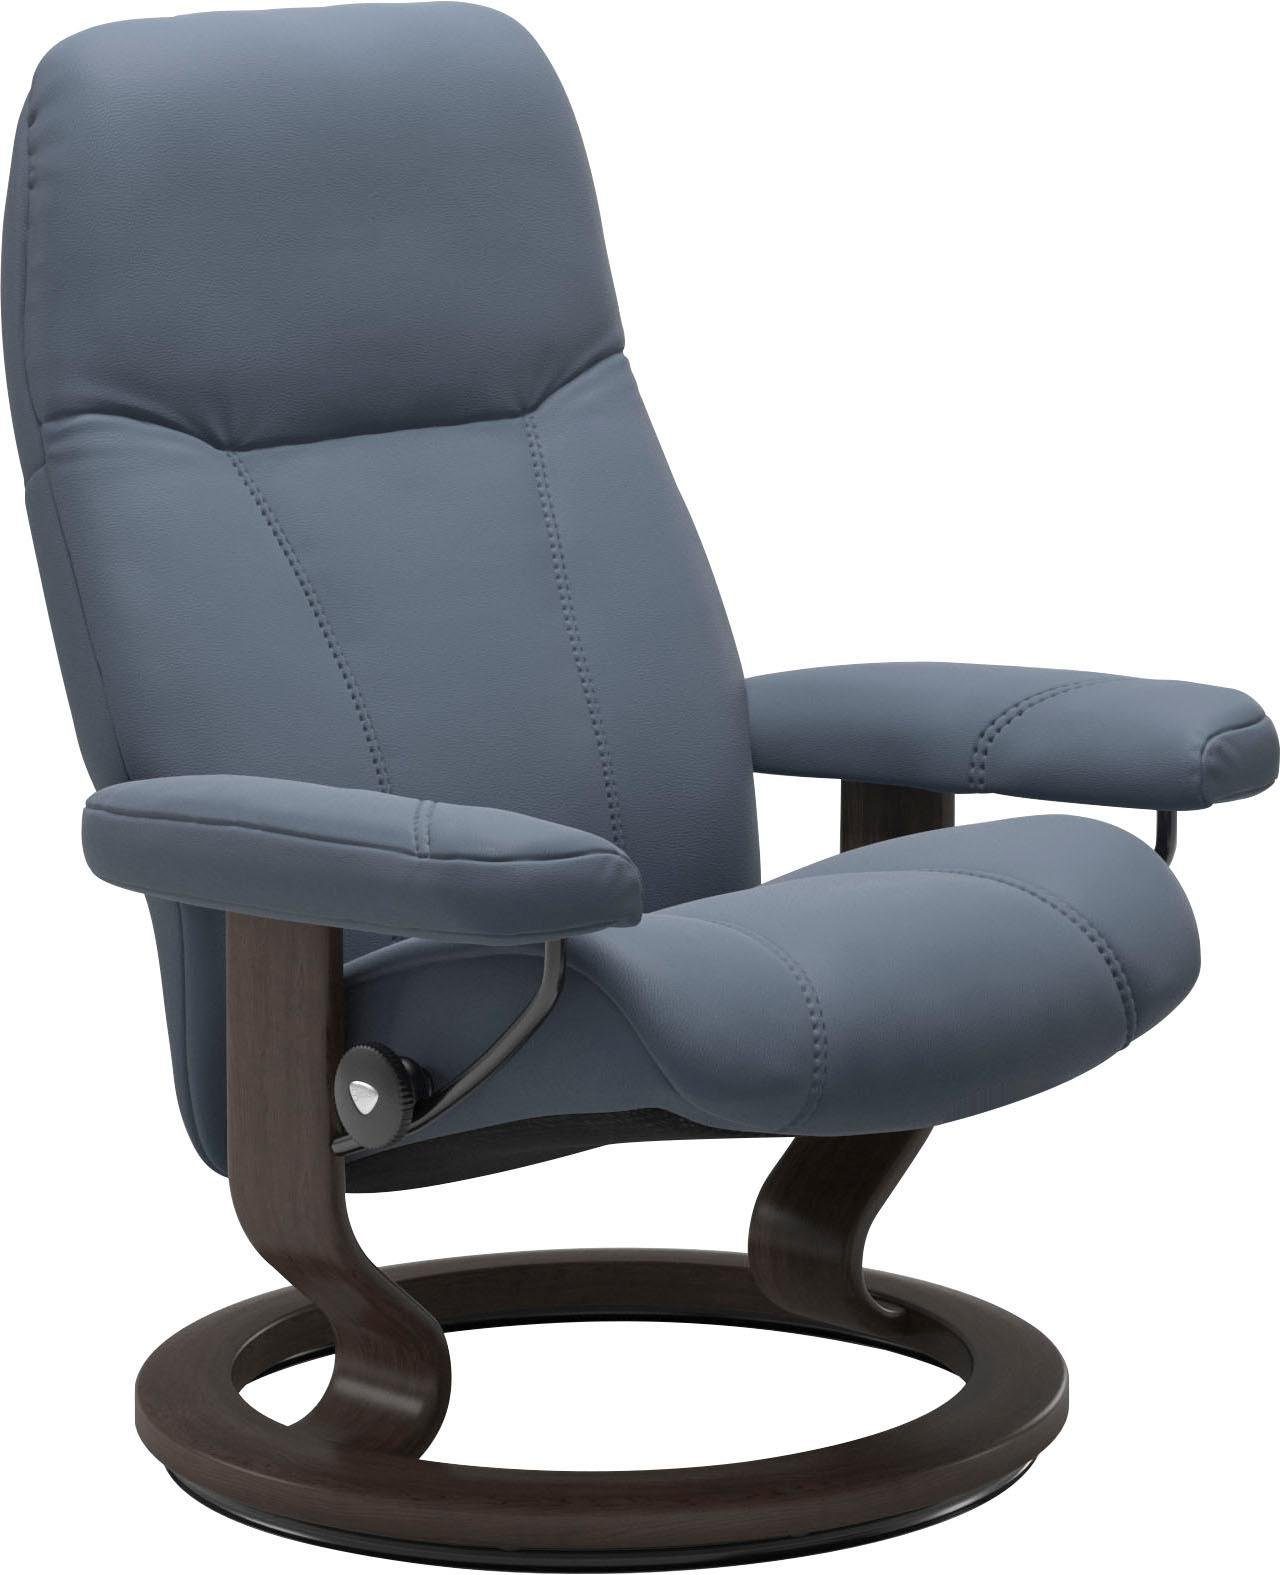 Consul, Größe Relaxsessel mit Stressless® Gestell Wenge L, Base, Classic